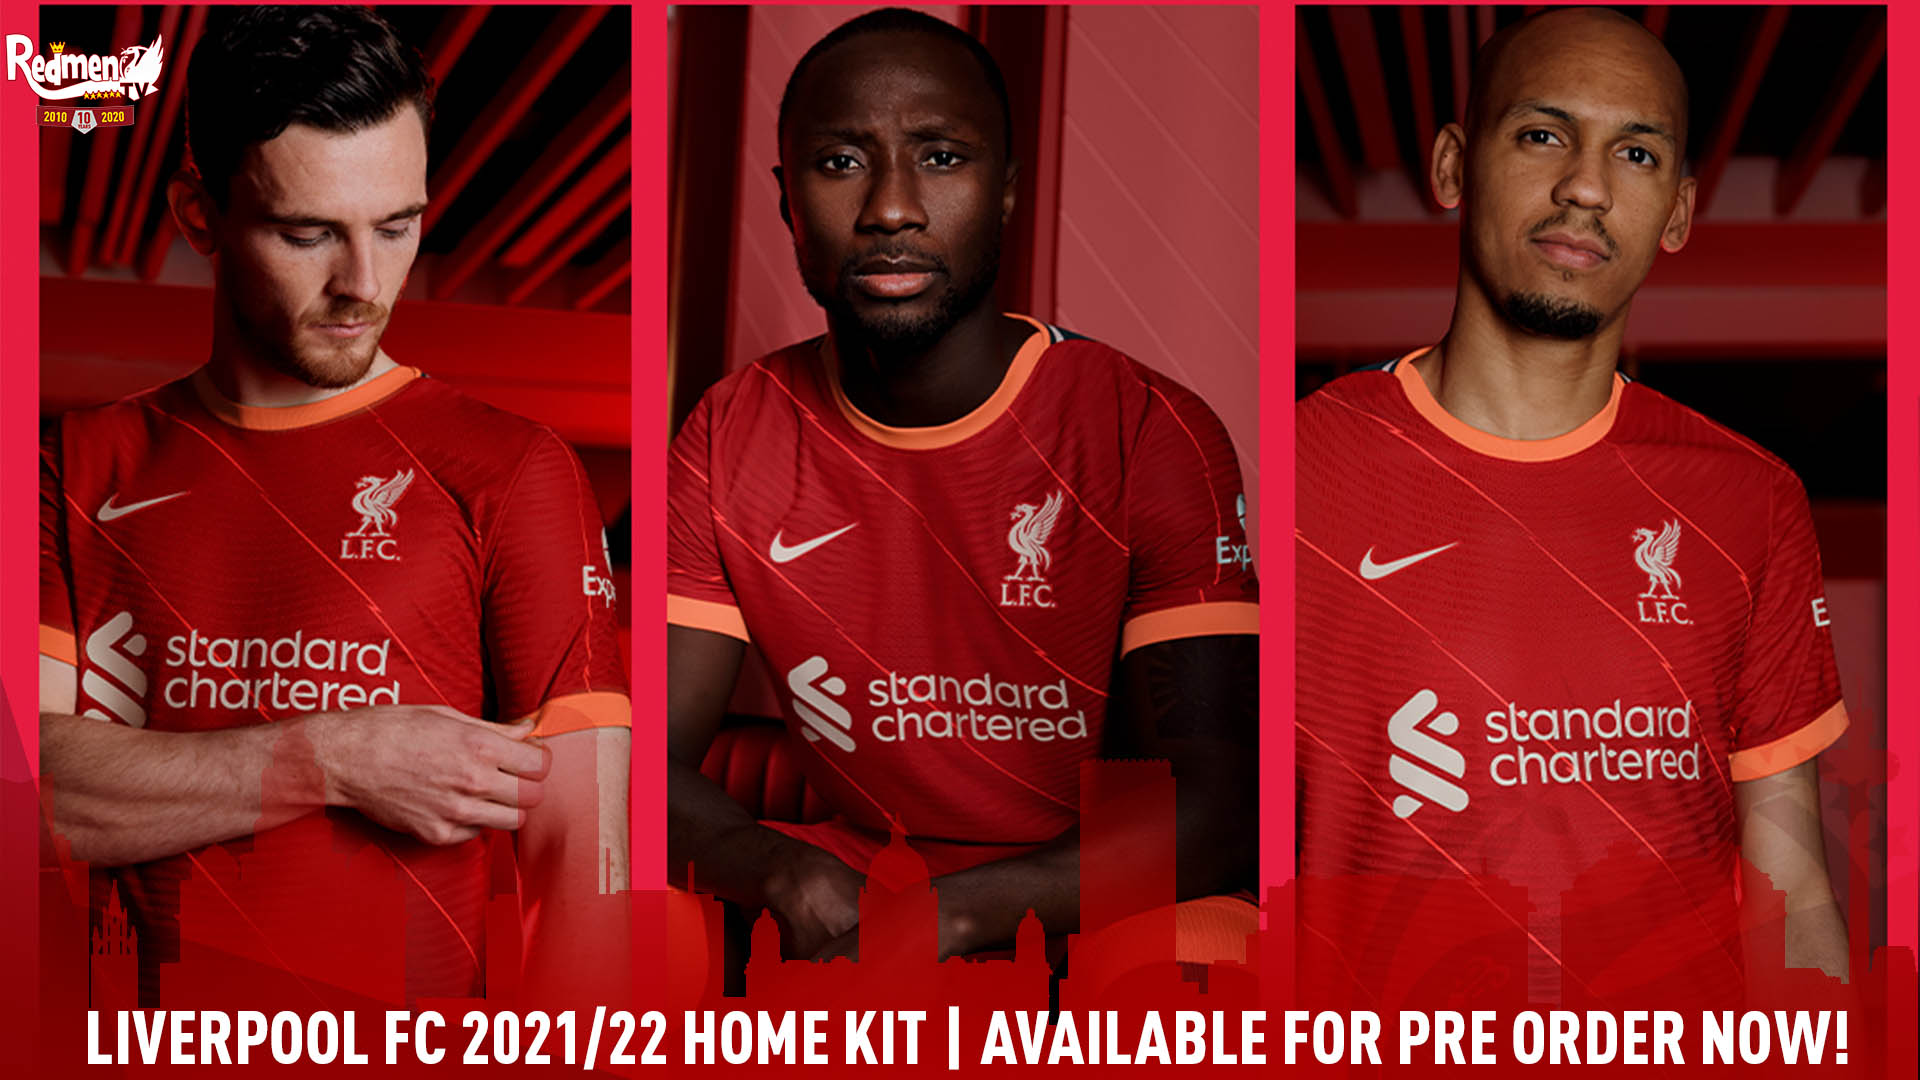 LIVERPOOL FC 2021 22 HOME KIT. AVAILABLE FOR PRE ORDER NOW! Redmen TV